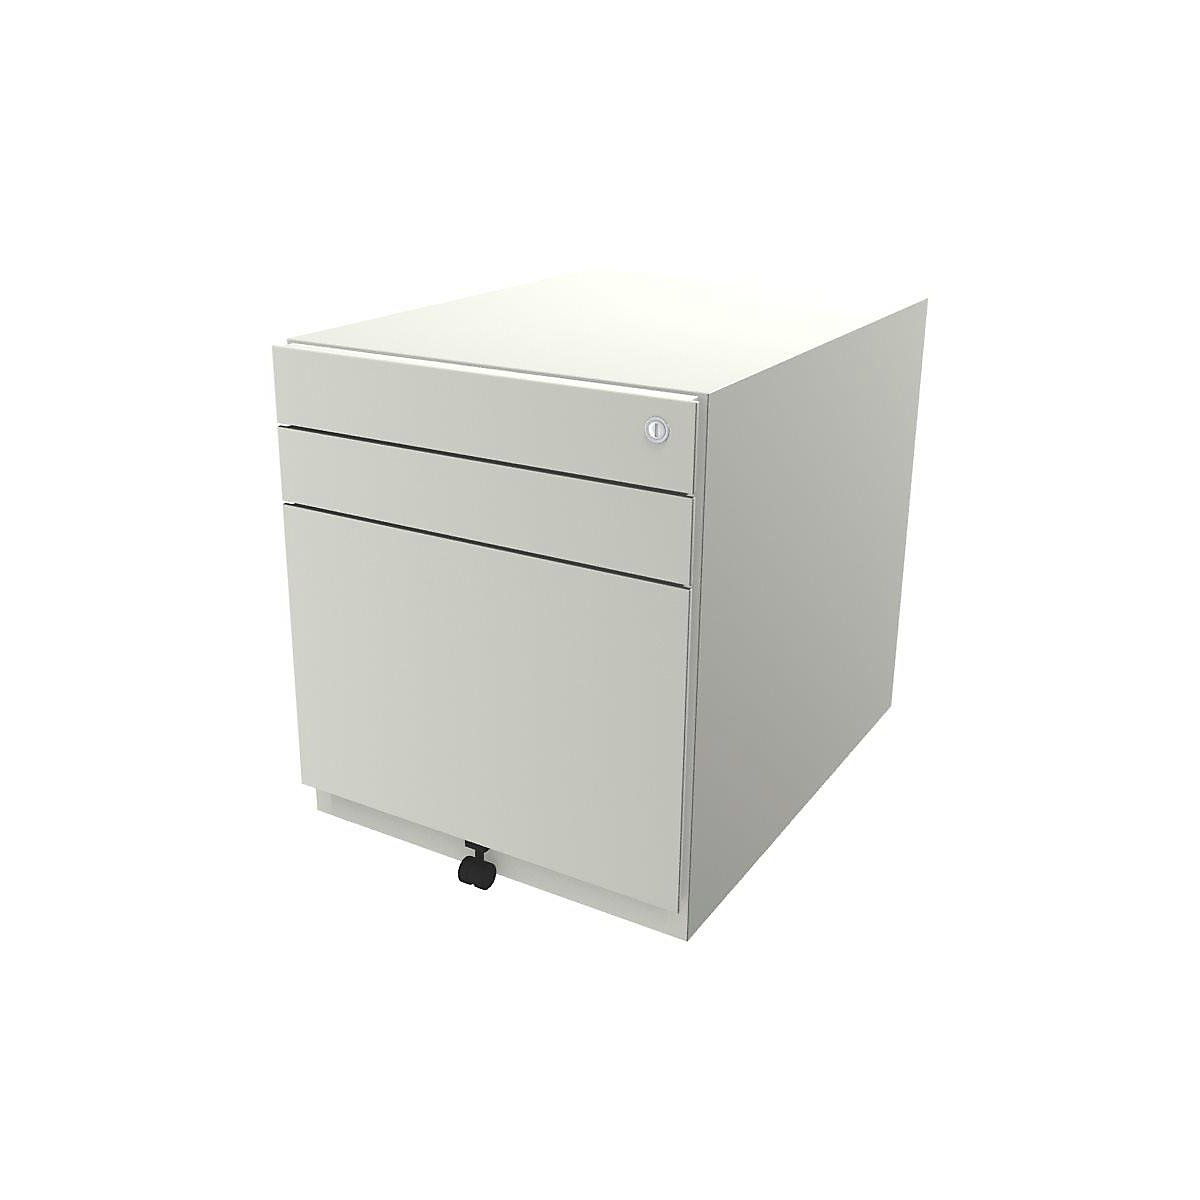 Note™ mobile drawer unit, with 2 universal drawers, 1 suspension file drawer – BISLEY, HxWxT 565 x 420 x 565 mm, pure white-10